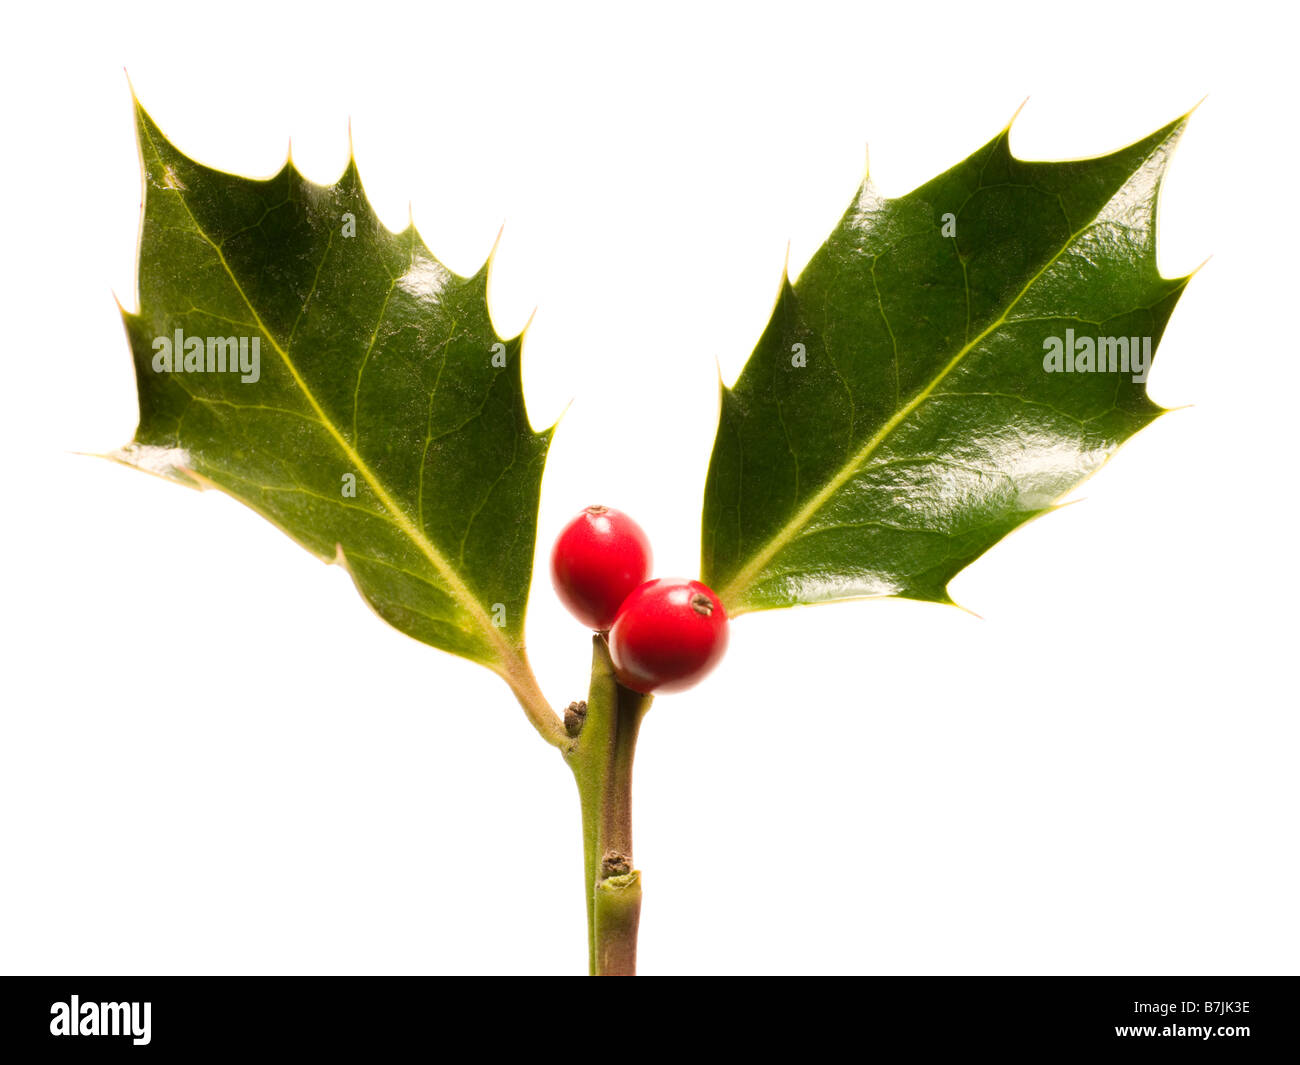 Holly Leaves And Berries Against White Background Stock Photo